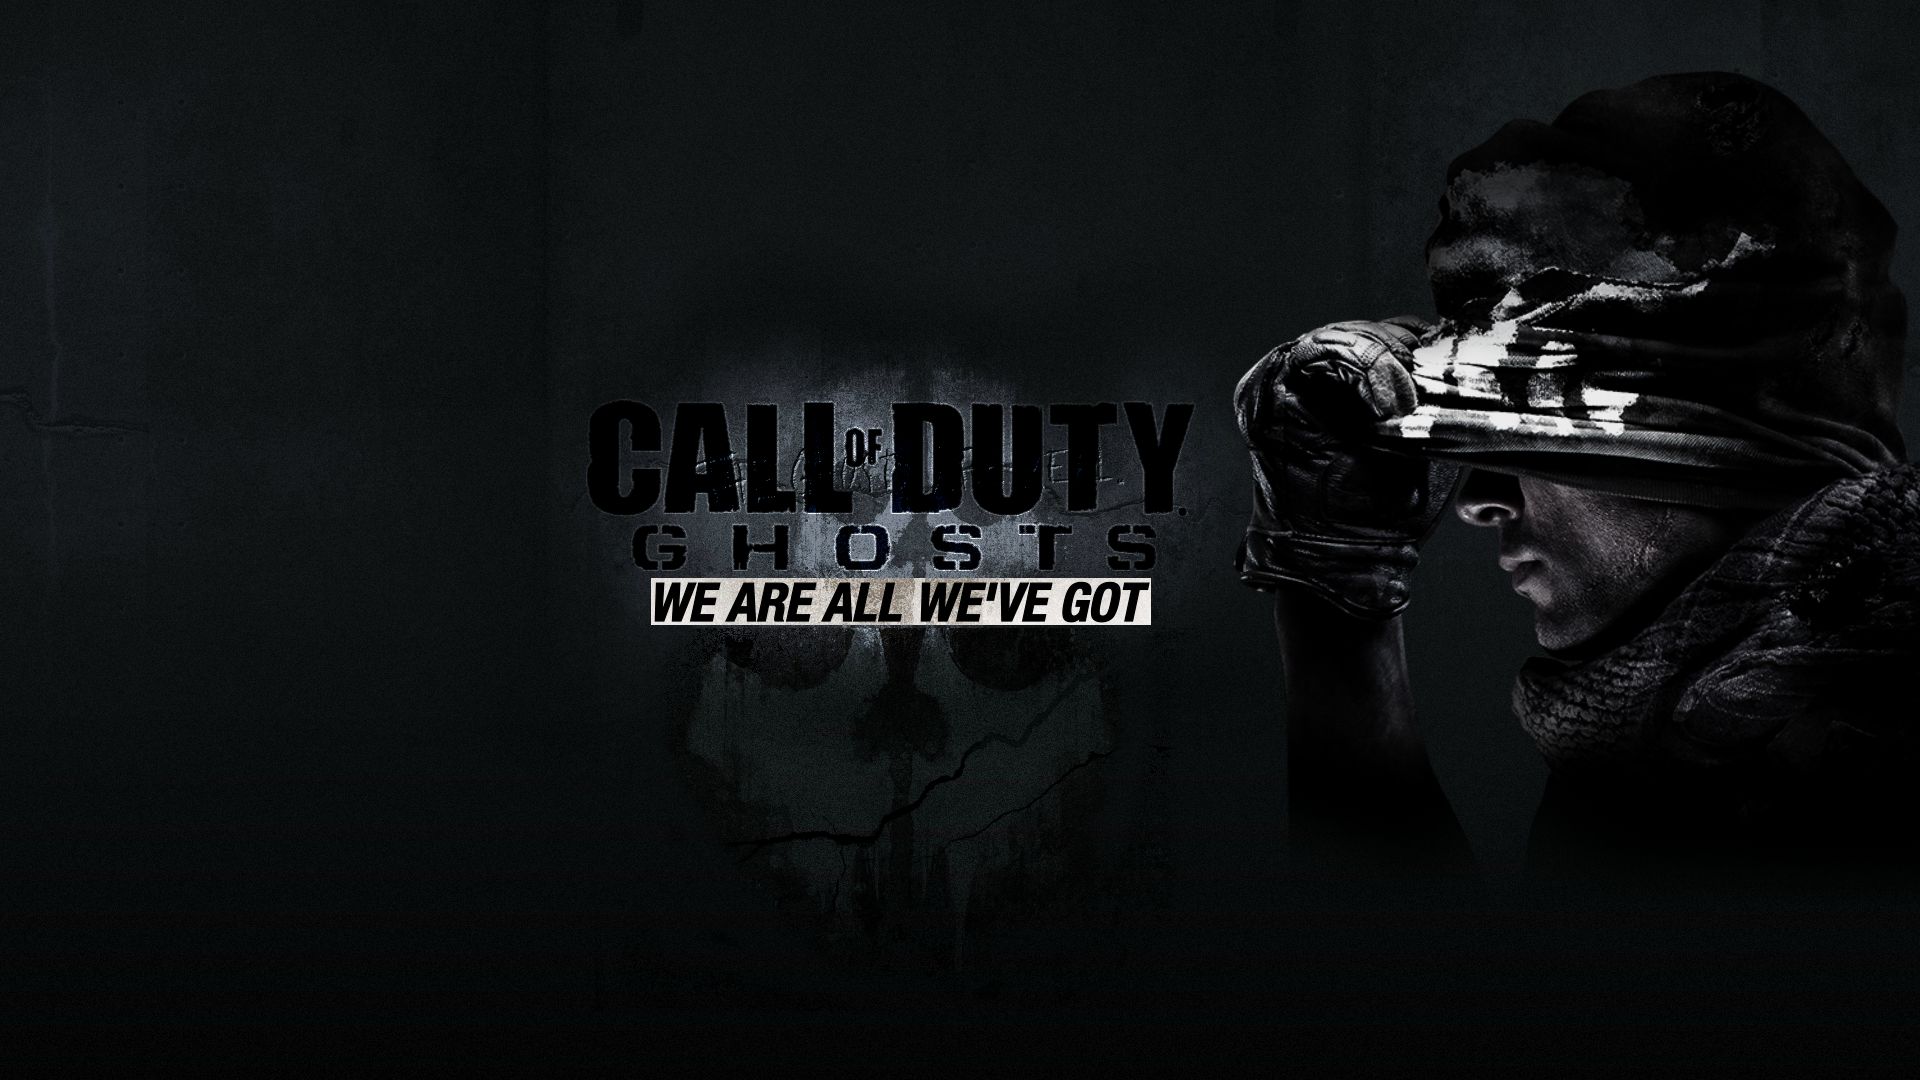 video game, call of duty: ghosts, call of duty 1080p